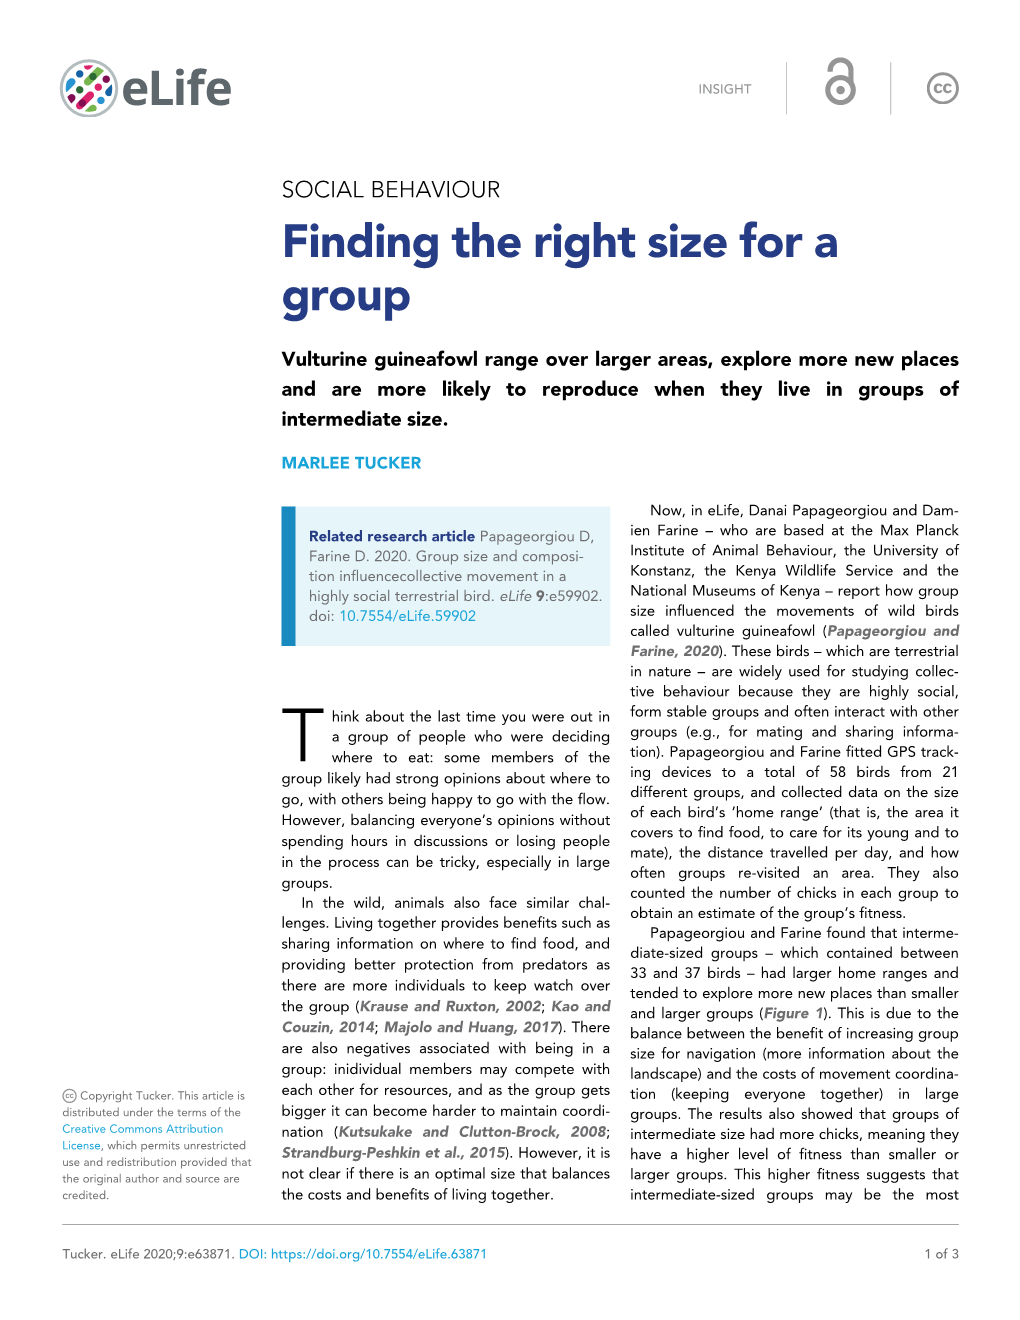 Finding the Right Size for a Group